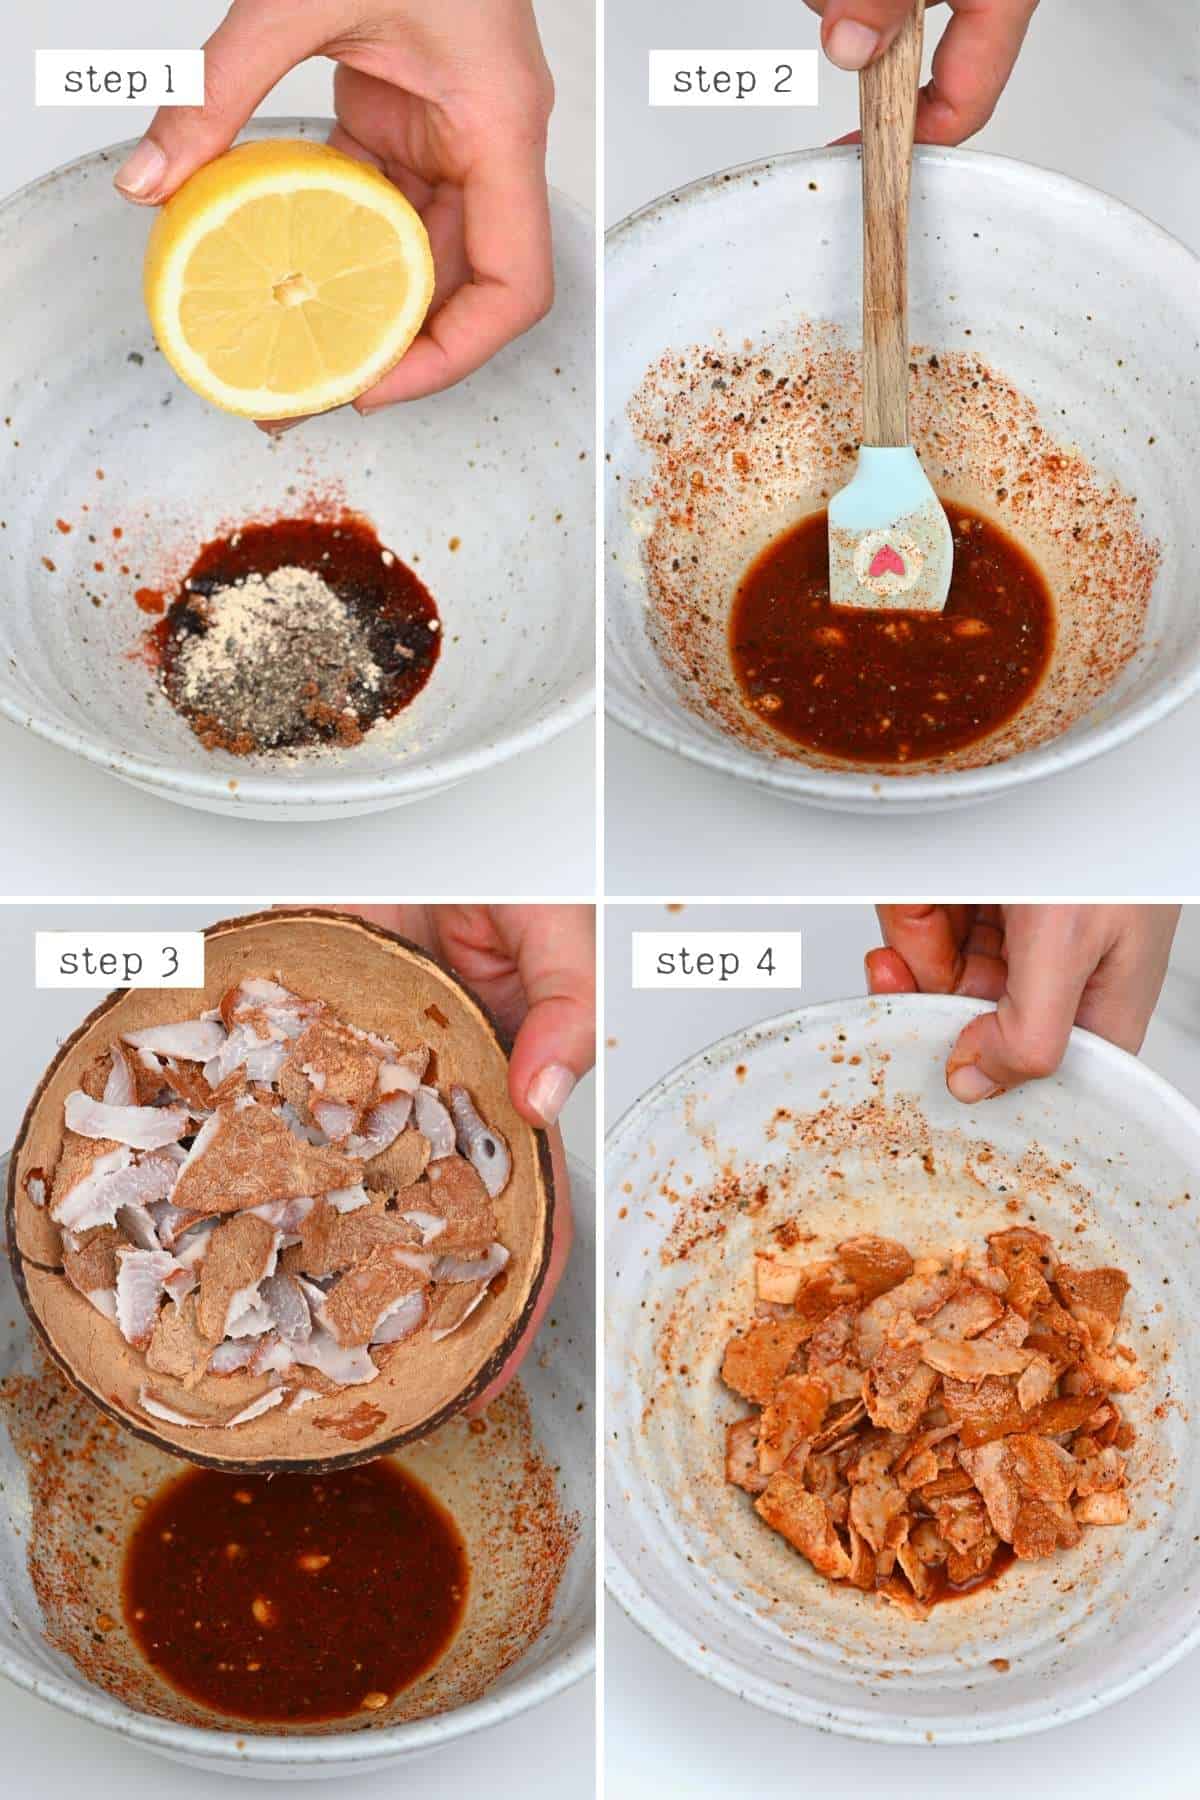 Steps for marinating coconut bacon